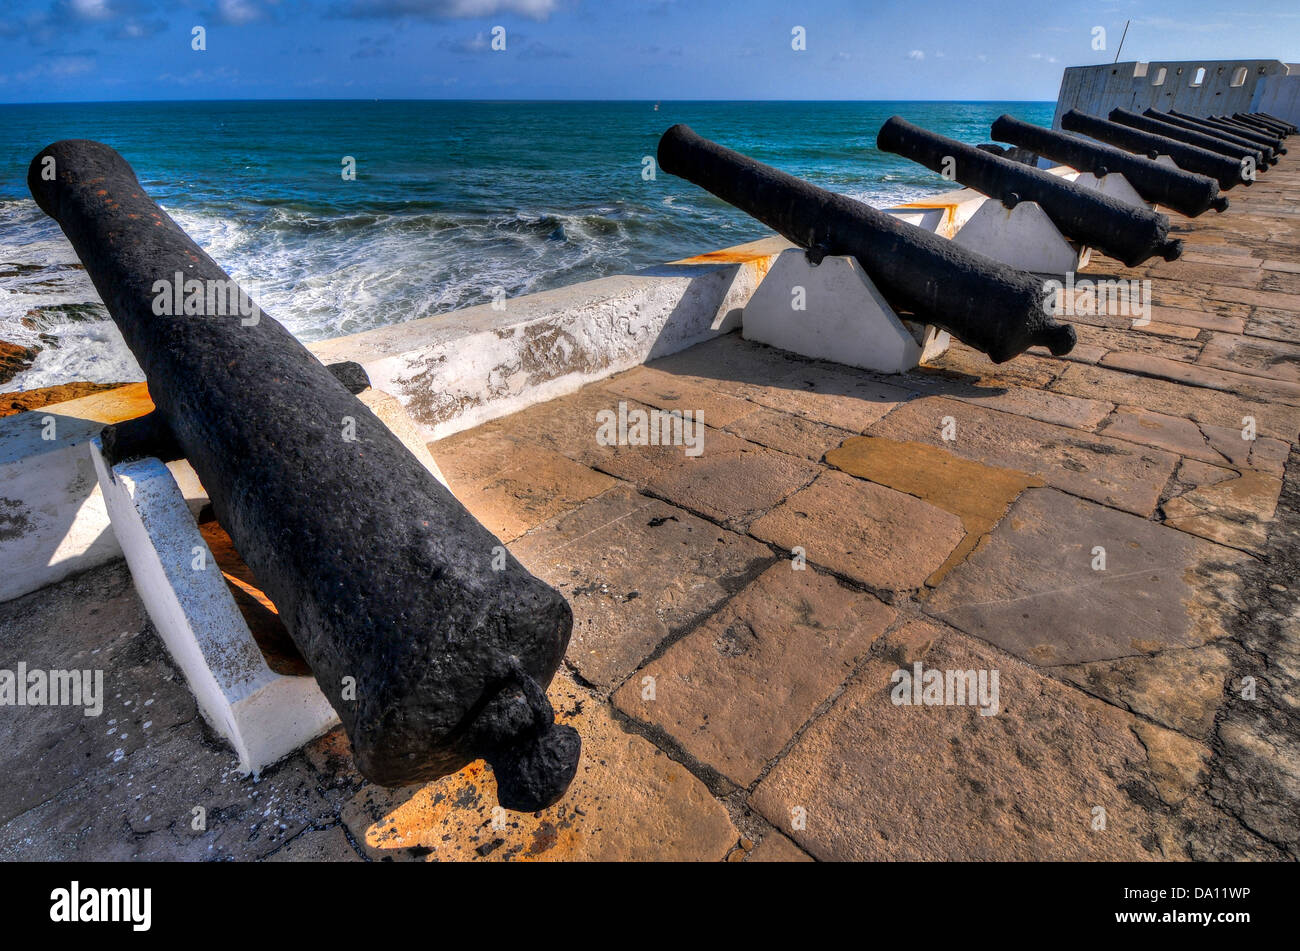 Cannons overlooking from Cape Coast Castle. Cape Coast Castle is a fortification in Ghana built by Swedish traders for trade. Stock Photo